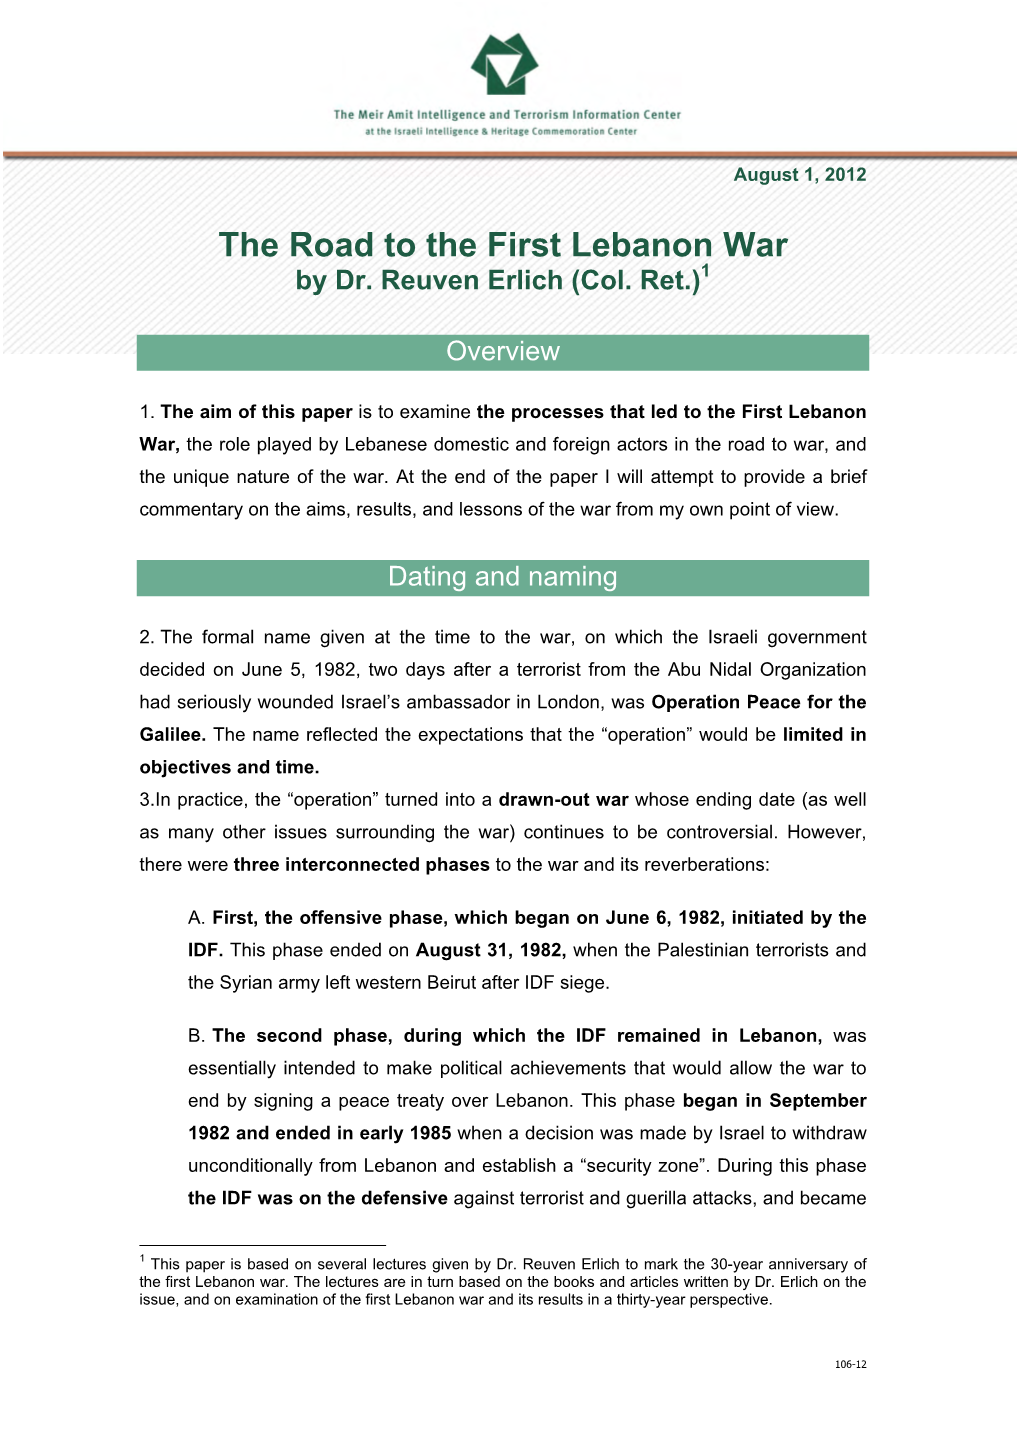 The Road to the First Lebanon War by Dr